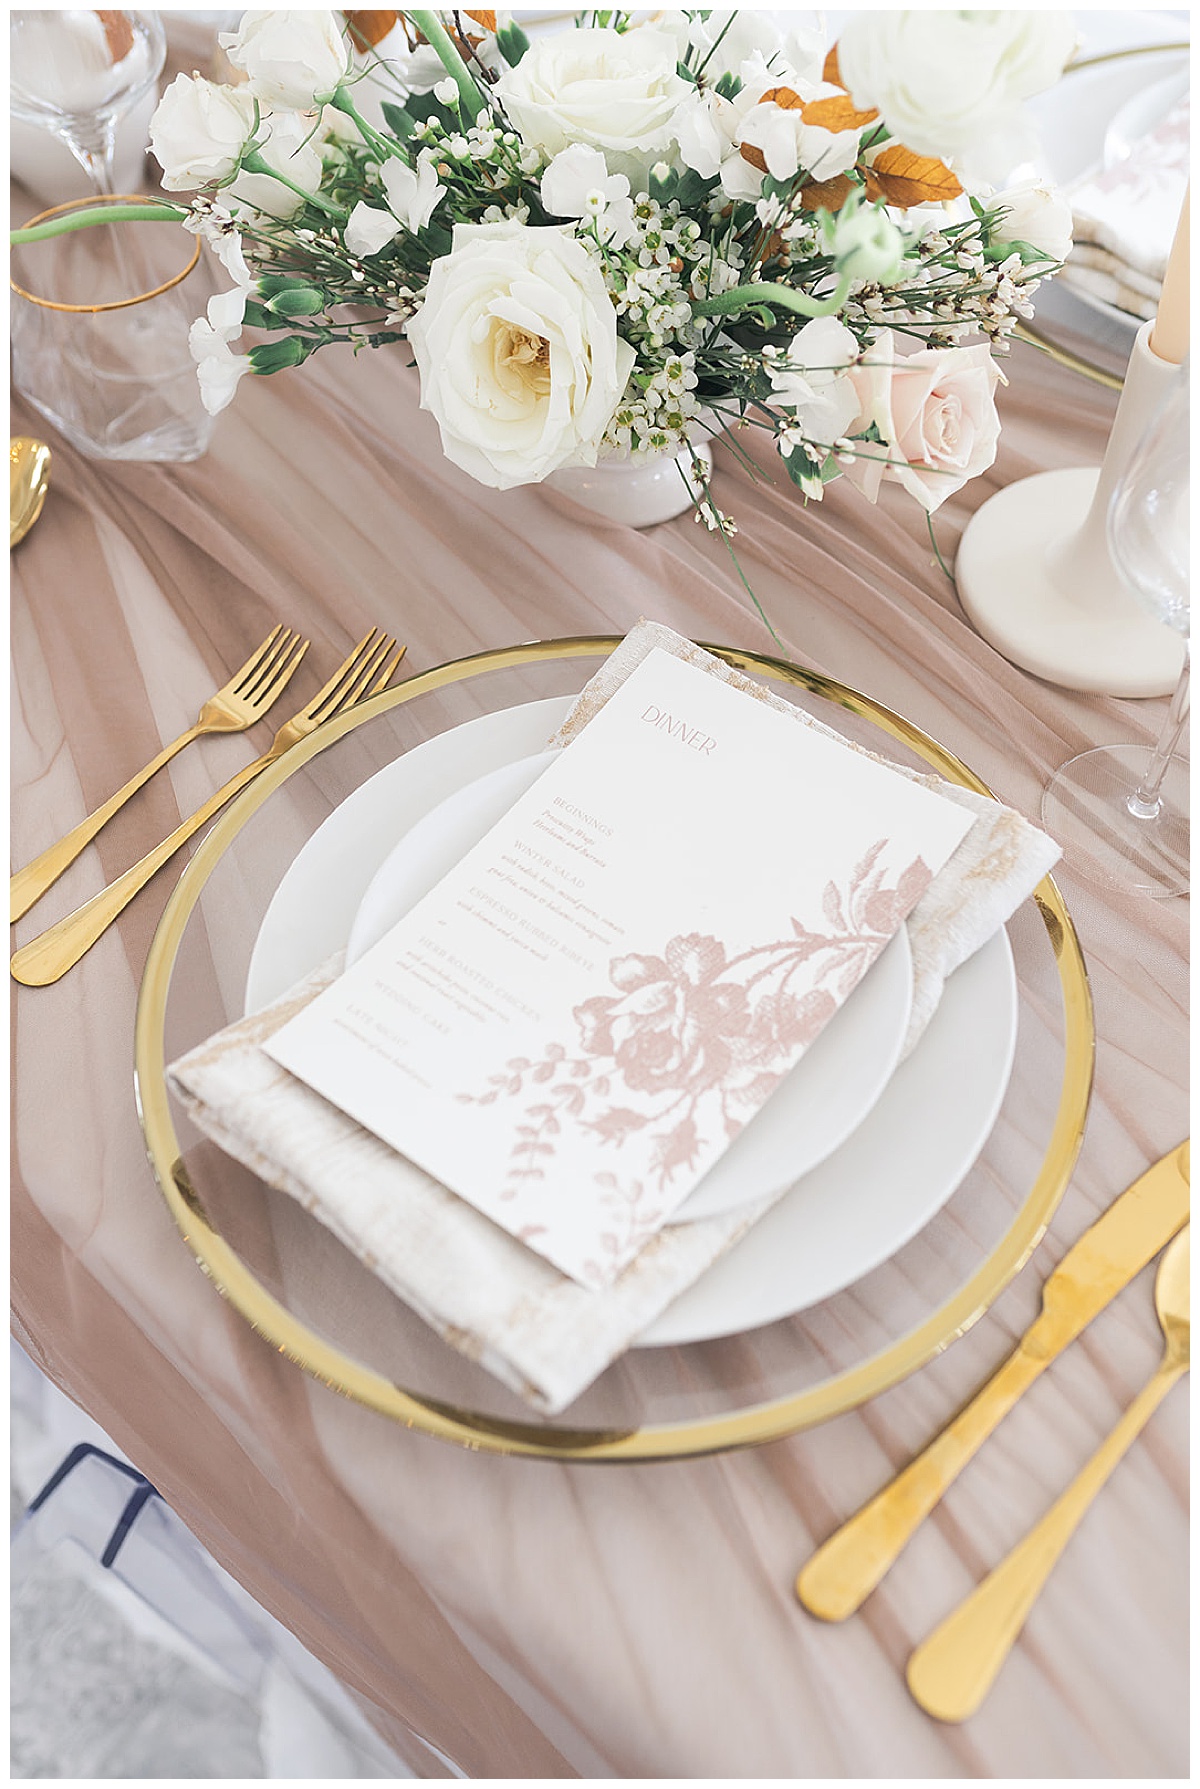 Details on tablescape by Swish & Click Photography